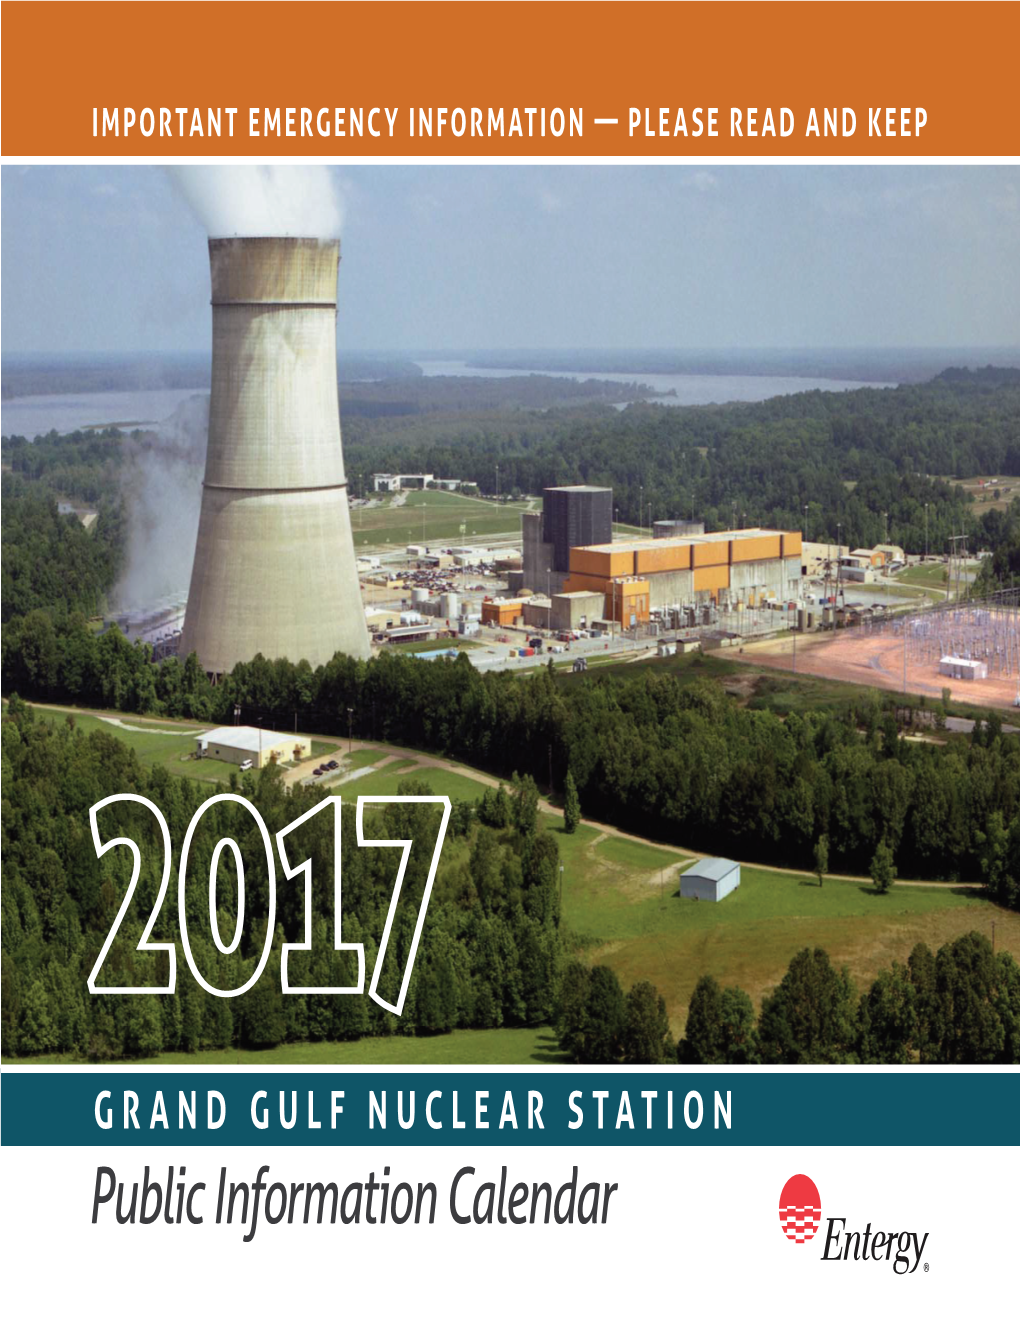 What to Do in Case of a Nuclear Power Plant Emergency